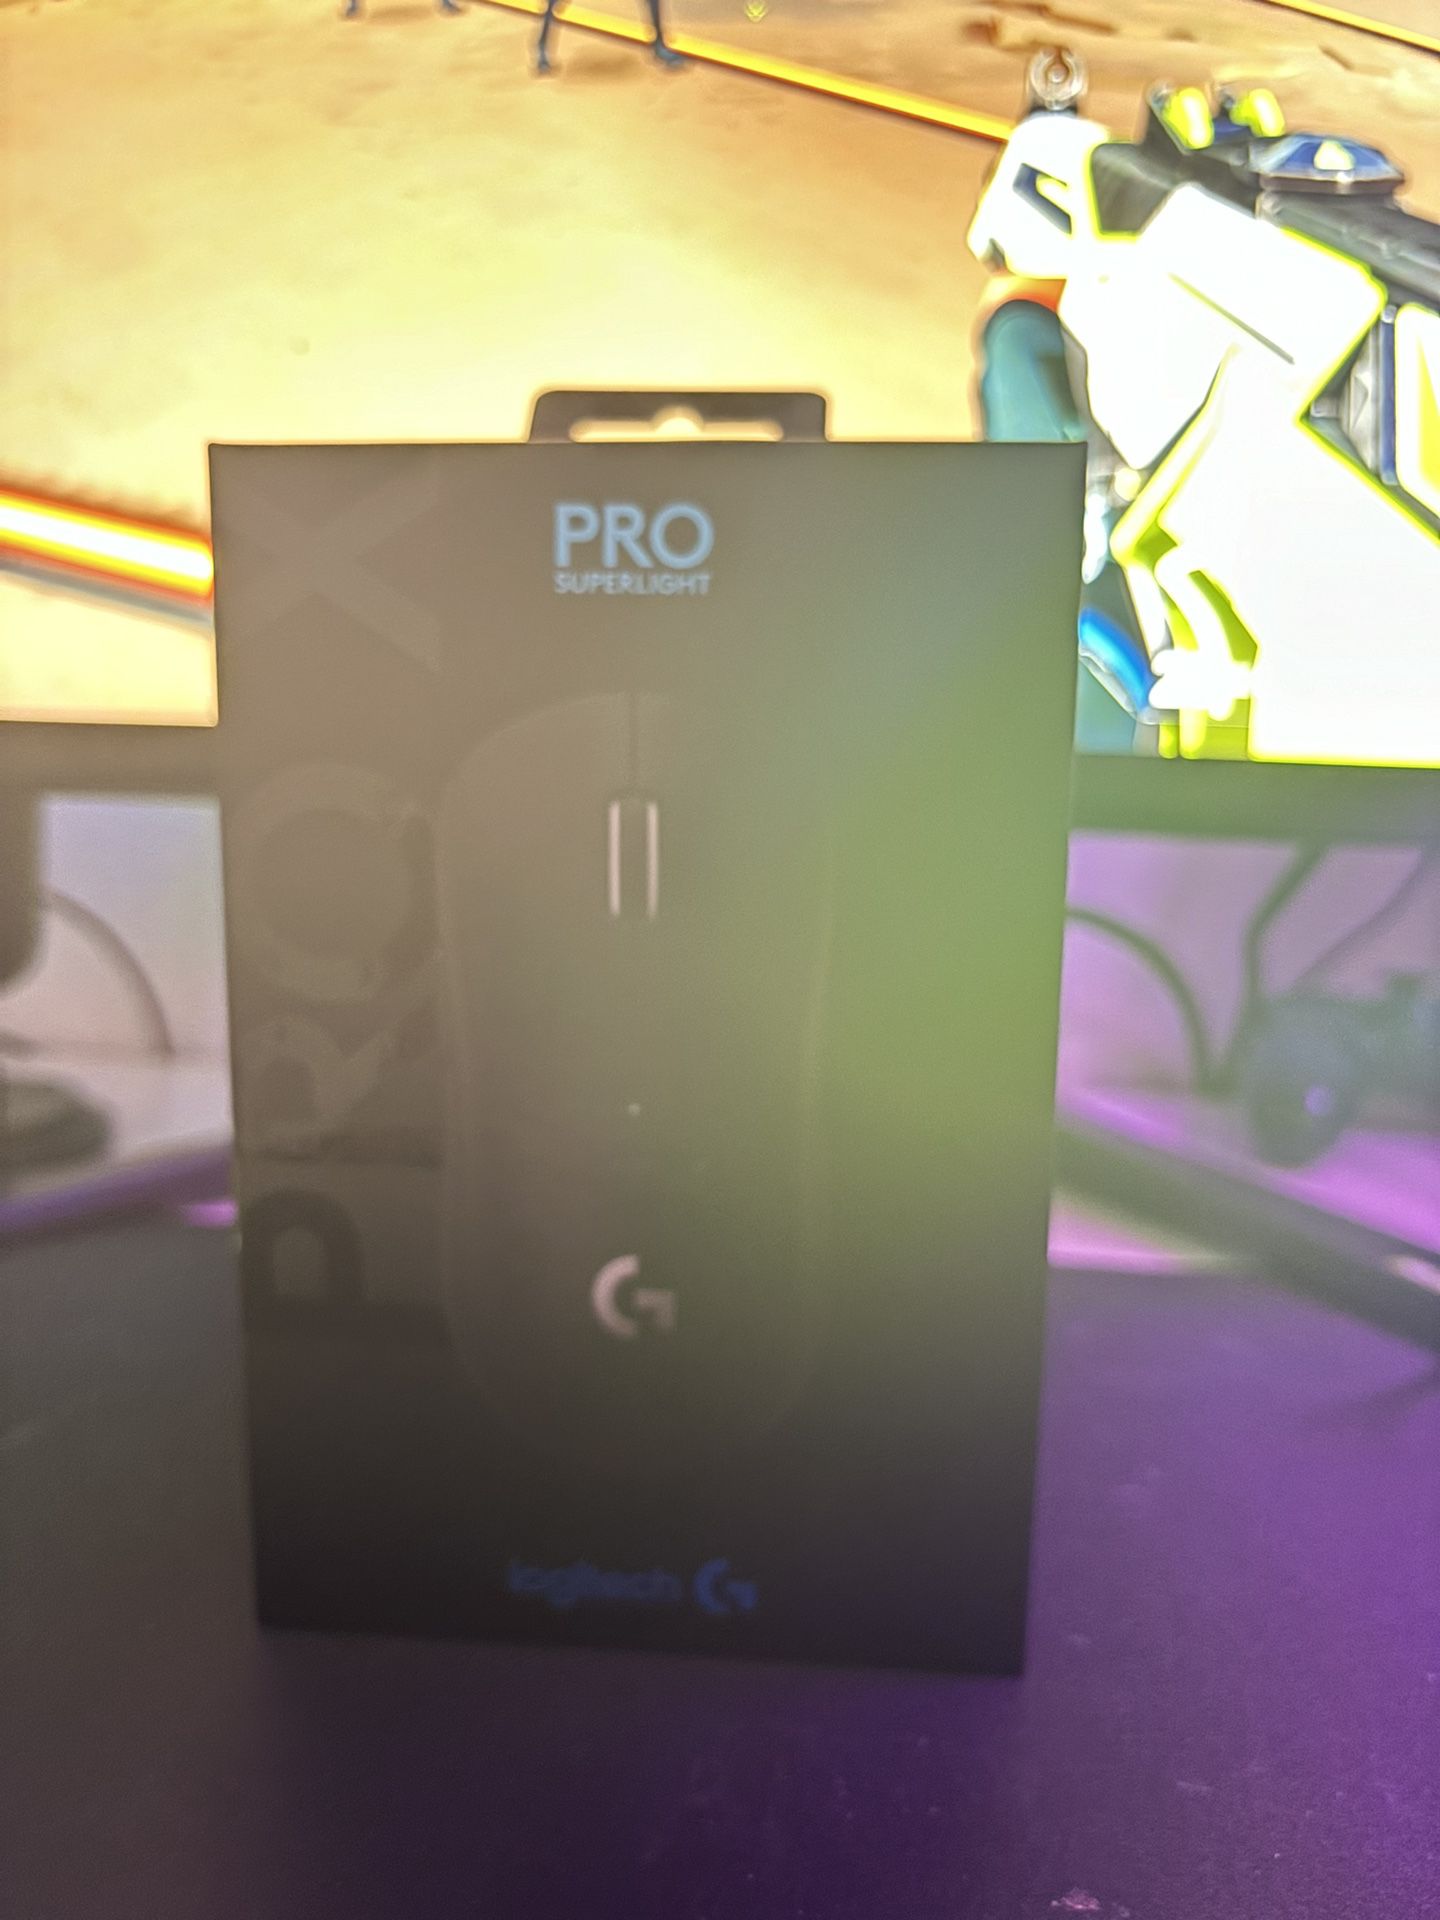 Pro X Super Light Gaming Mouse